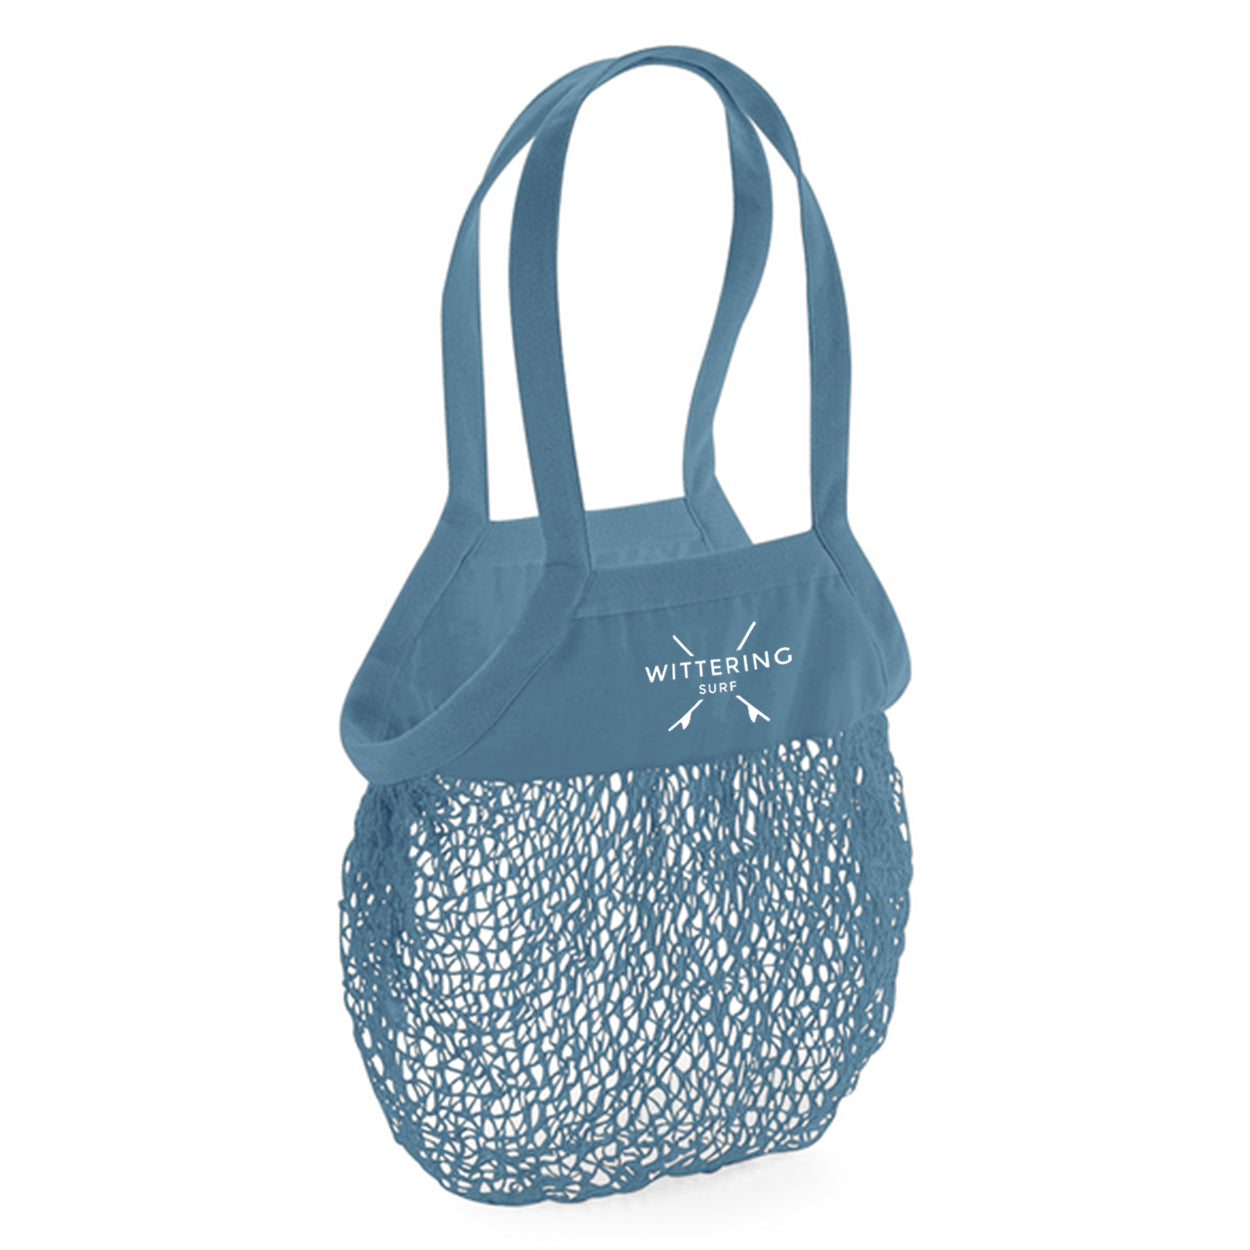 SURF MESH GROCERY BAG - AIRFORCE BLUE